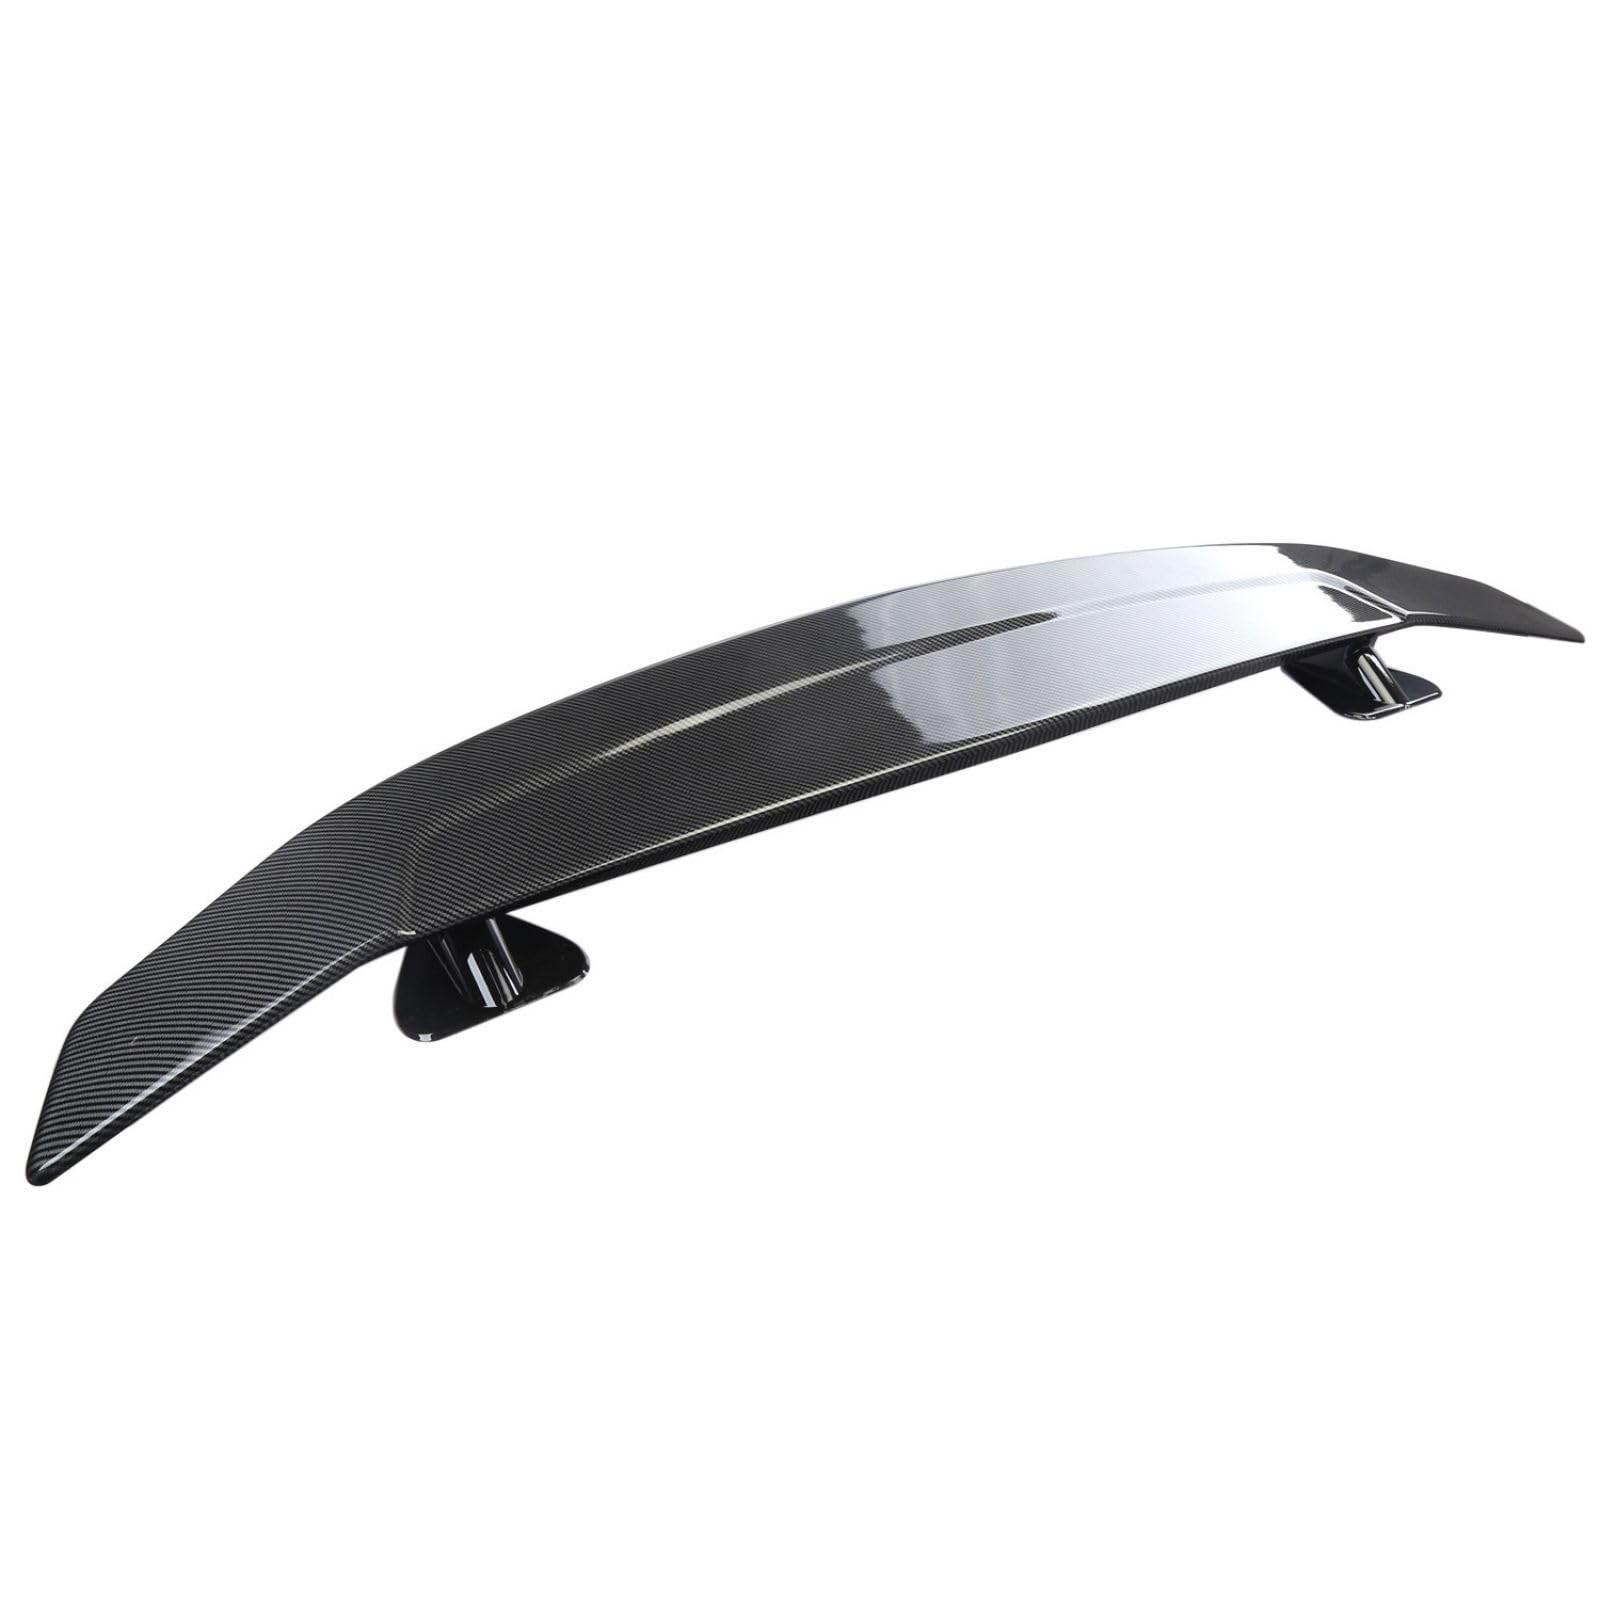 Car Rear Window Spoiler for Alfa Romeo GTV (916, facelift 2003) 2003-2004, without Perforation Lid Spoiler Wings Installation Rear Wing Decoration,Carbon Fiber Color von EESWCSZZ3